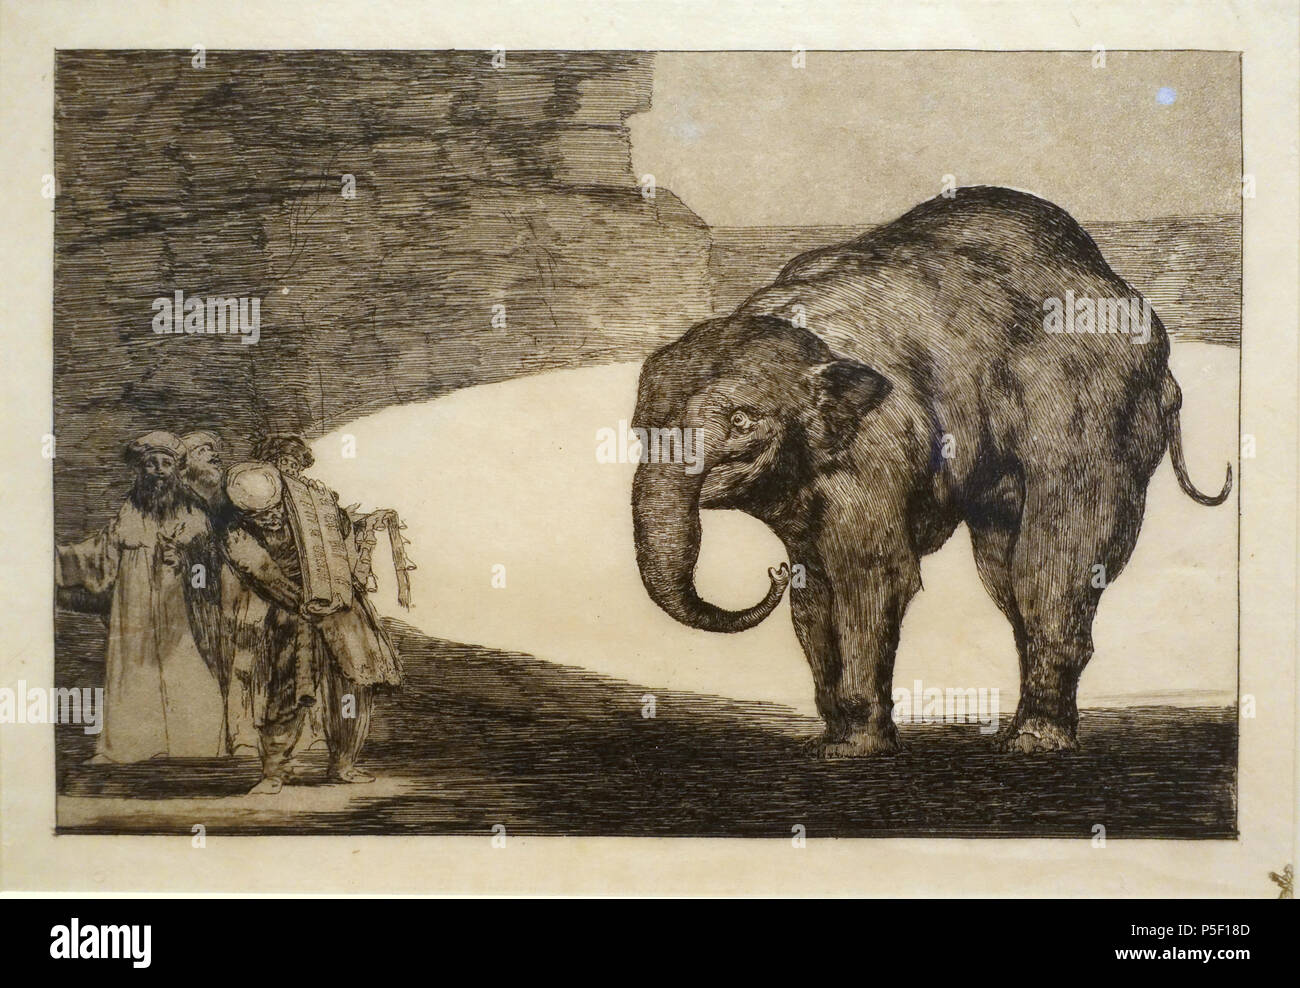 N/A. English: Print by by Francisco de Goya y Lucientes in the Museum Berggruen, Schloßstraße 1, 14059 Berlin, Germany. This artwork is in the  because its creator died more than 100 years ago. 15 November 2014, 08:09:34. Daderot 102 Animal foolishness (Other laws for the people), by Francisco de Goya y Lucientes, 1815-1824, etching and aquatint on Japanese paper - Museum Berggruen - DSC03785 Stock Photo